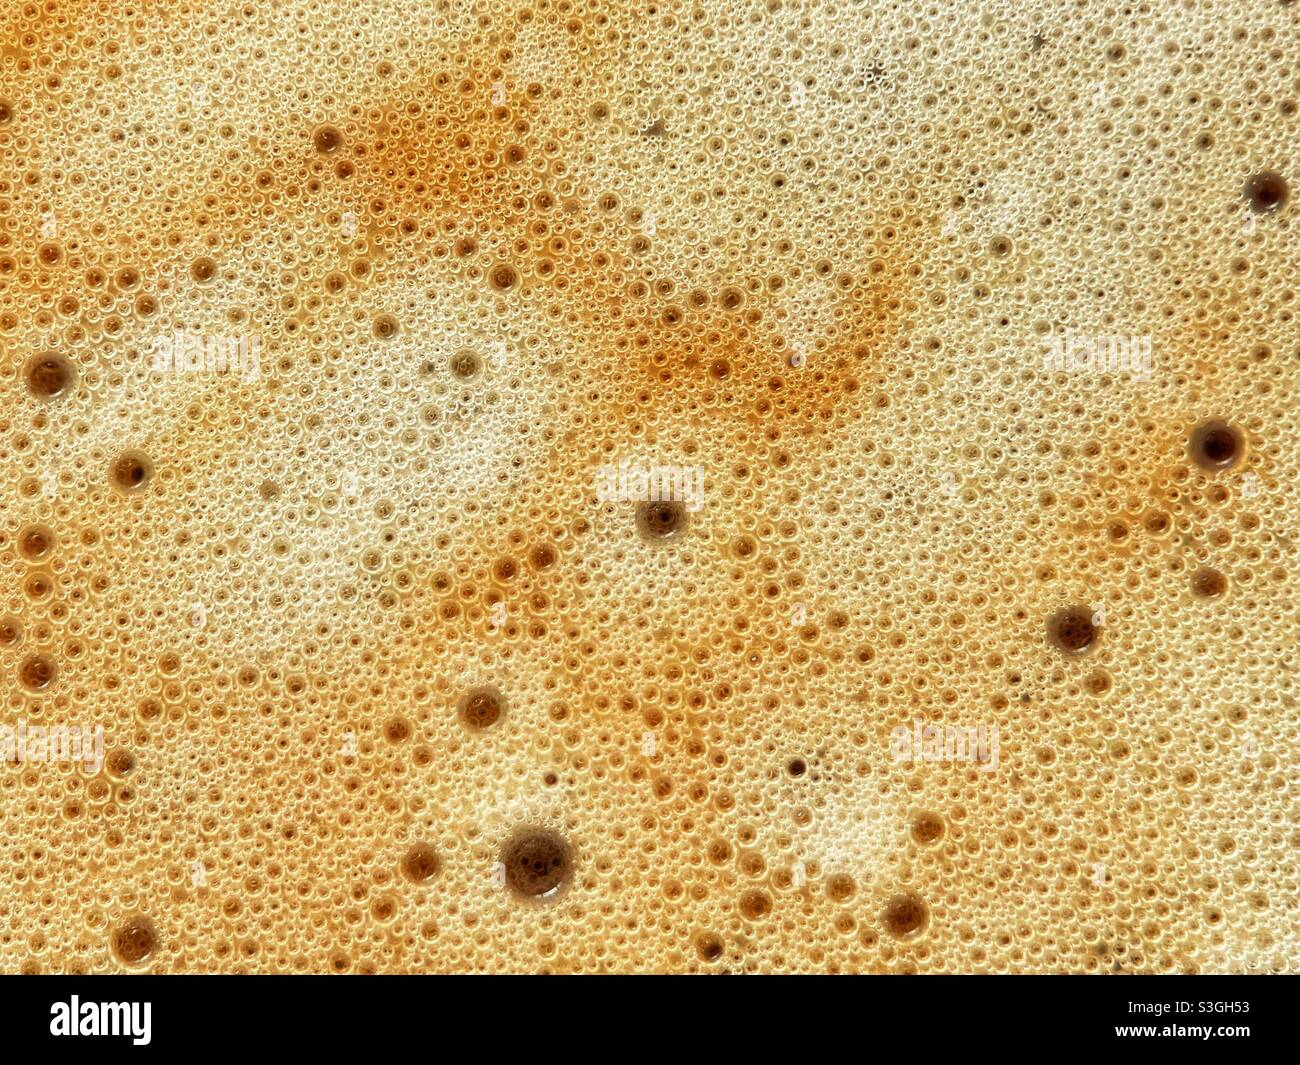 Close -up view of bubbles of different sizes on the froth of a freshly brewed coffee Stock Photo